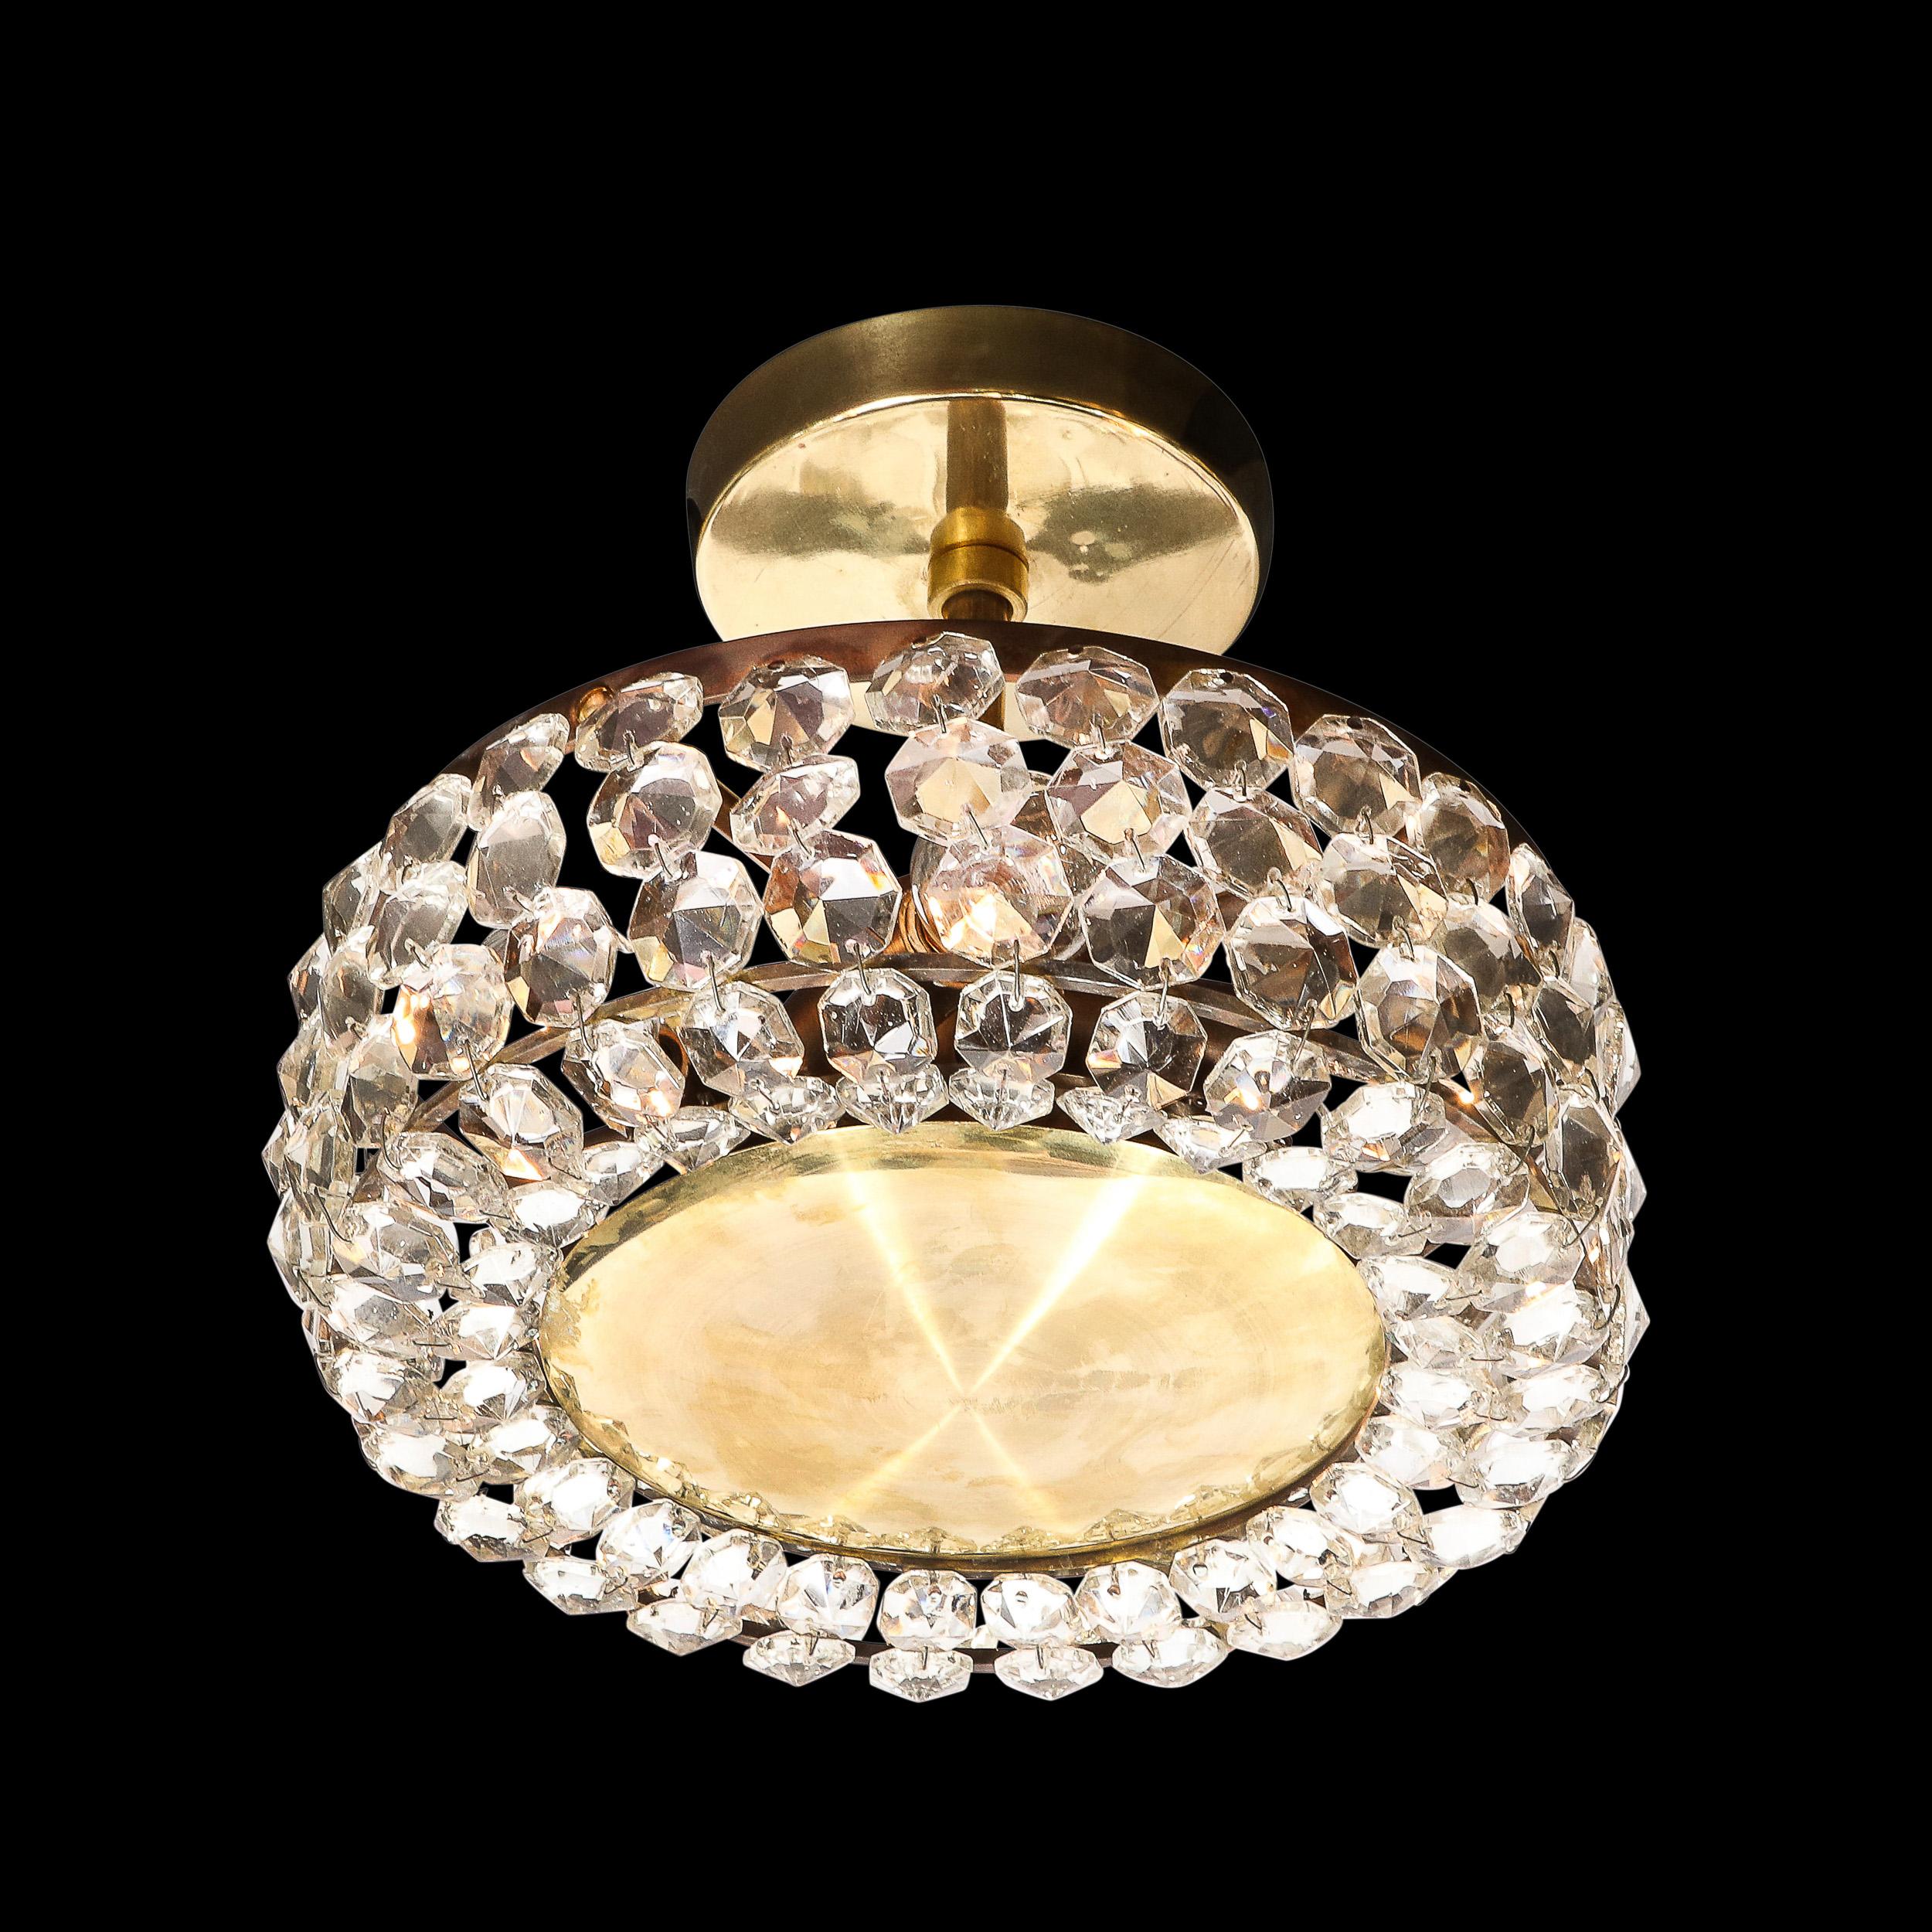 This Mid-Century Modernist Crystal and Brushed Brass Pendant Chandelier by Bakalowits and Sohne originates from Austria, Circa 1960. This pendant is a well adorned and charming fixture, featuring a polished brass canopy, rod, and frame supporting